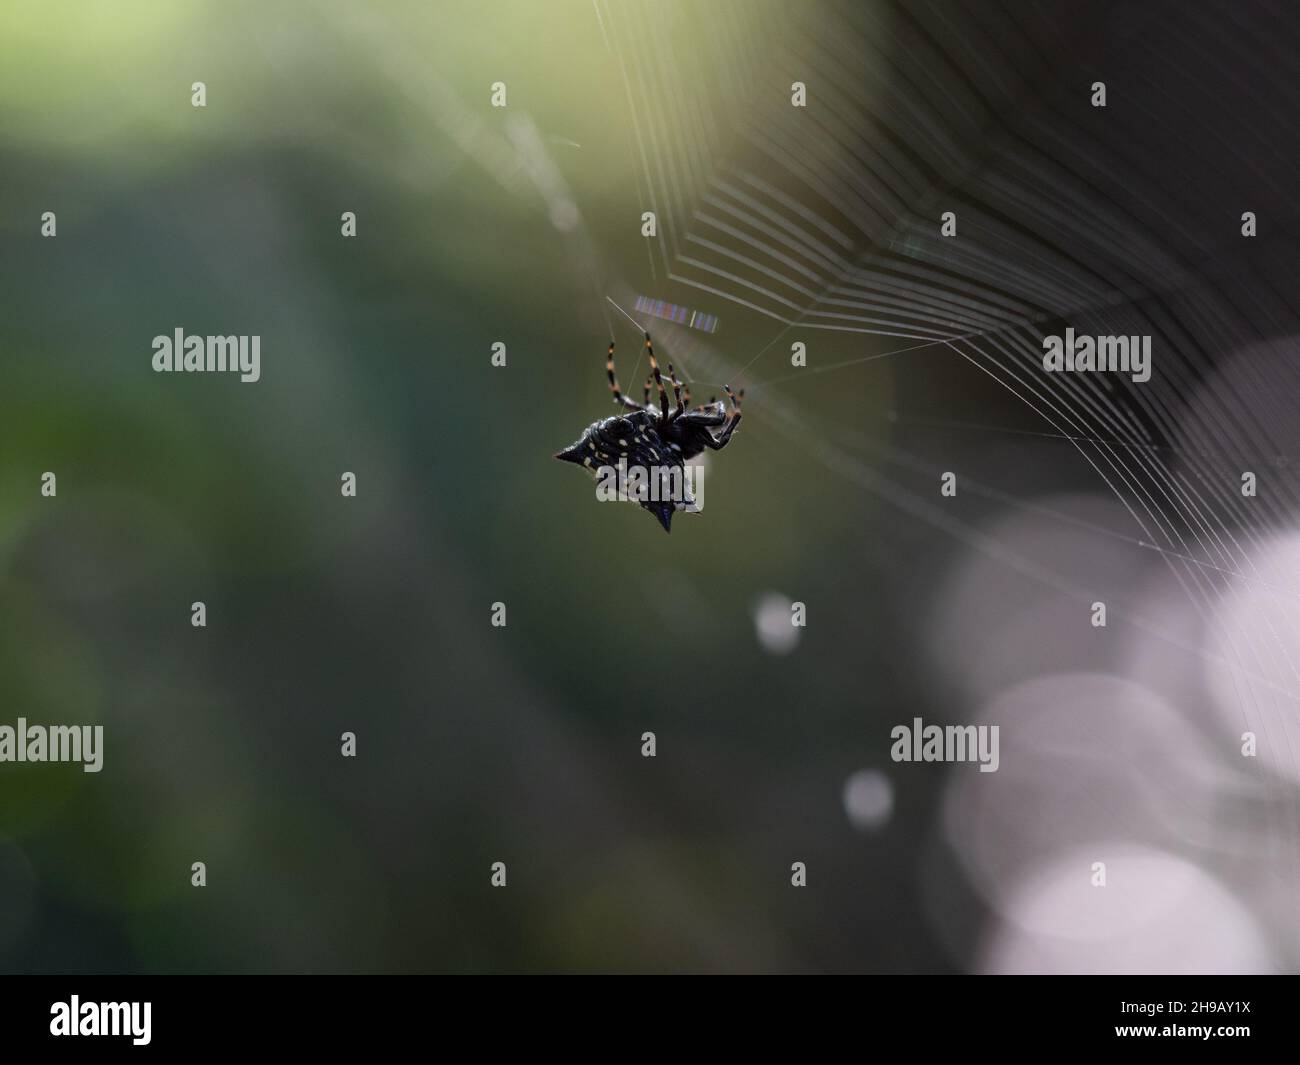 A spiny orb weaver spider or spiny-backed orbweaver spider building a web. Photographed with a shallow depth of field. Stock Photo